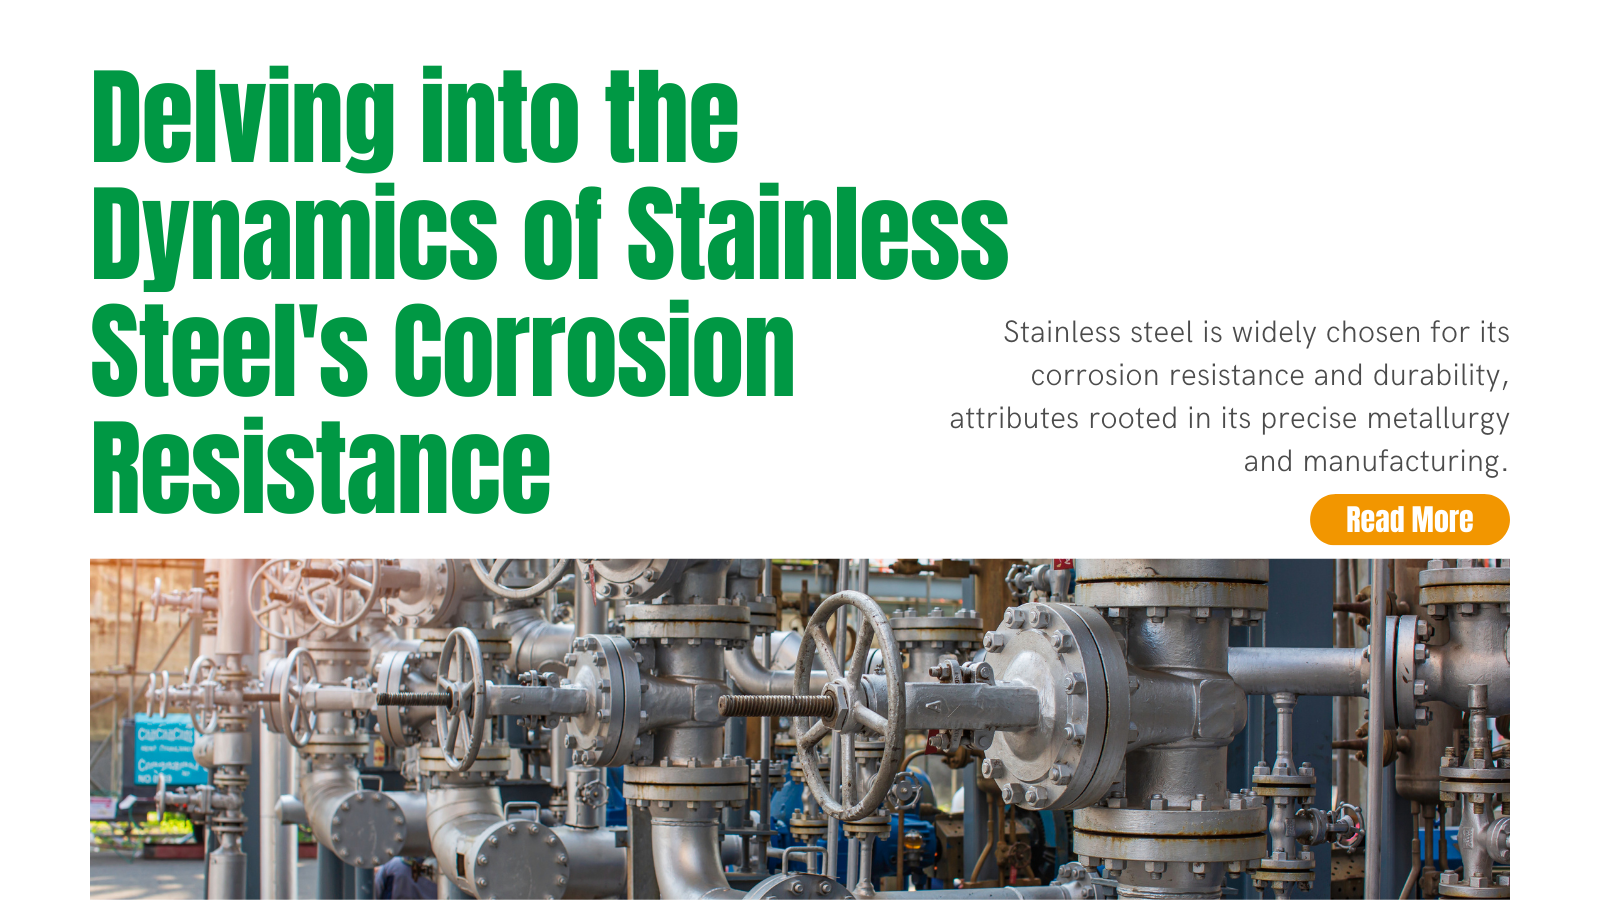 Delving into the Dynamics of Stainless Steel's Corrosion Resistance | INOX-TEK